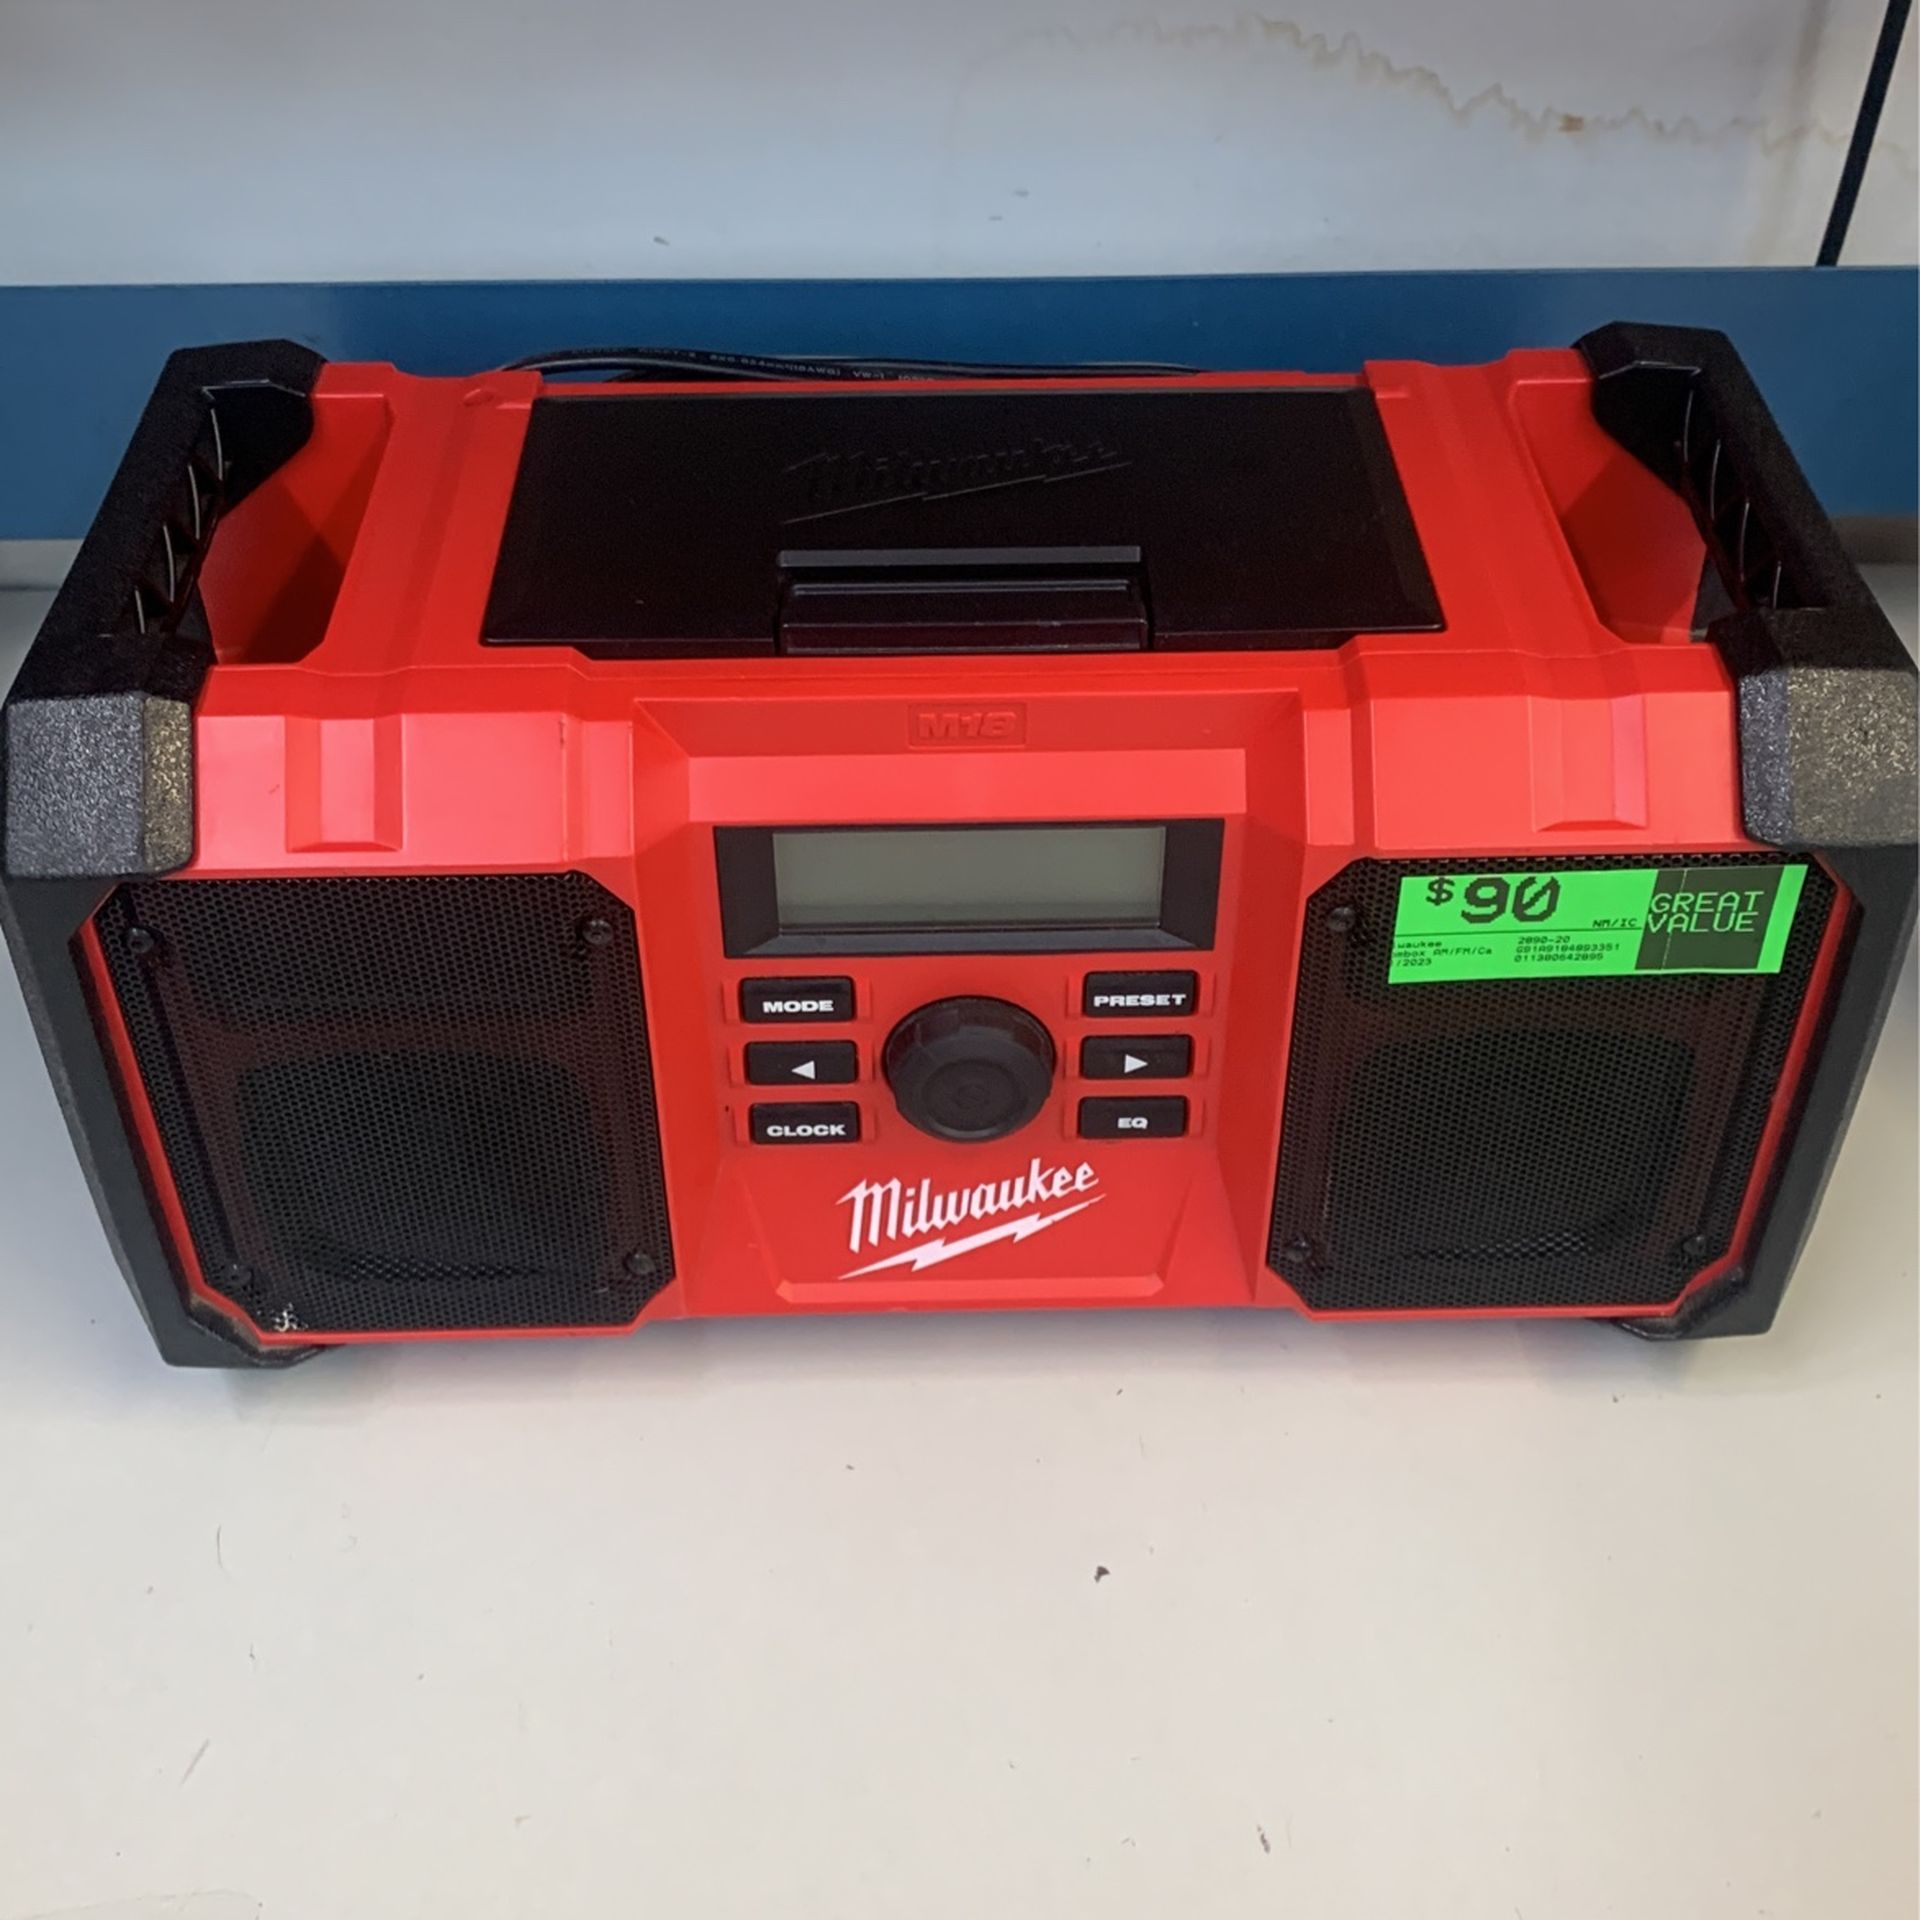 Milwaukee JobSite Raffle And Battery Charger